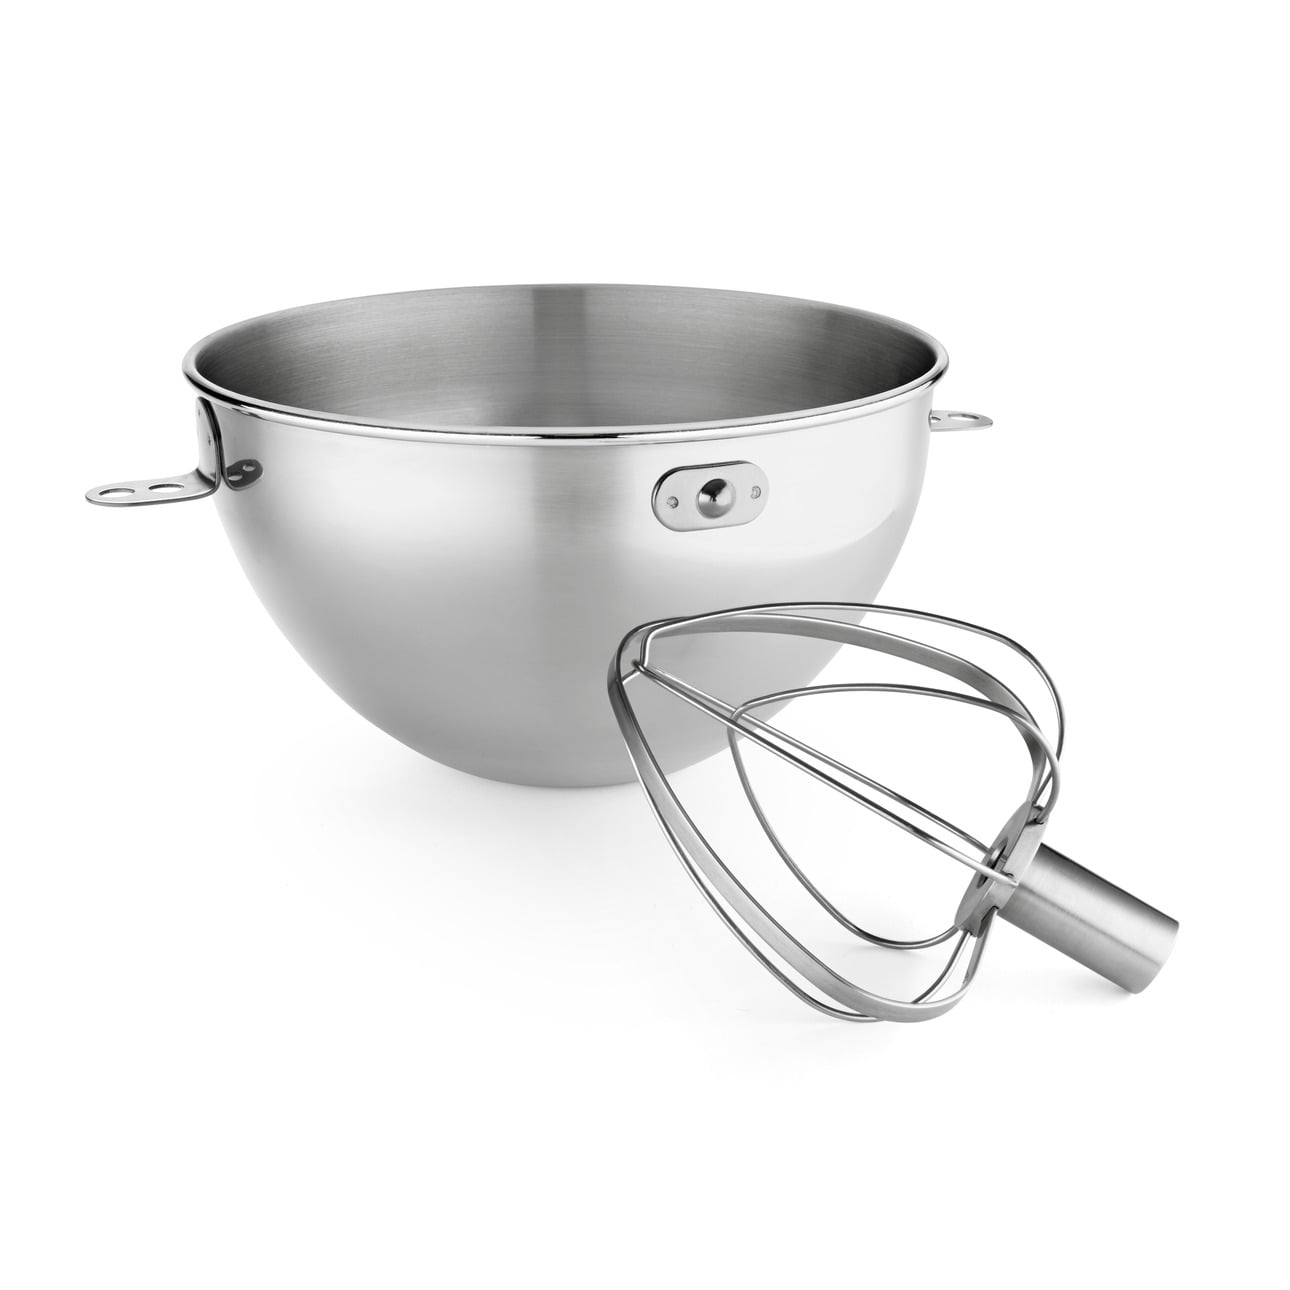 Stainless Steel Stand Mixer Mixing Bowl with Handle Camping Hiking Cookware 